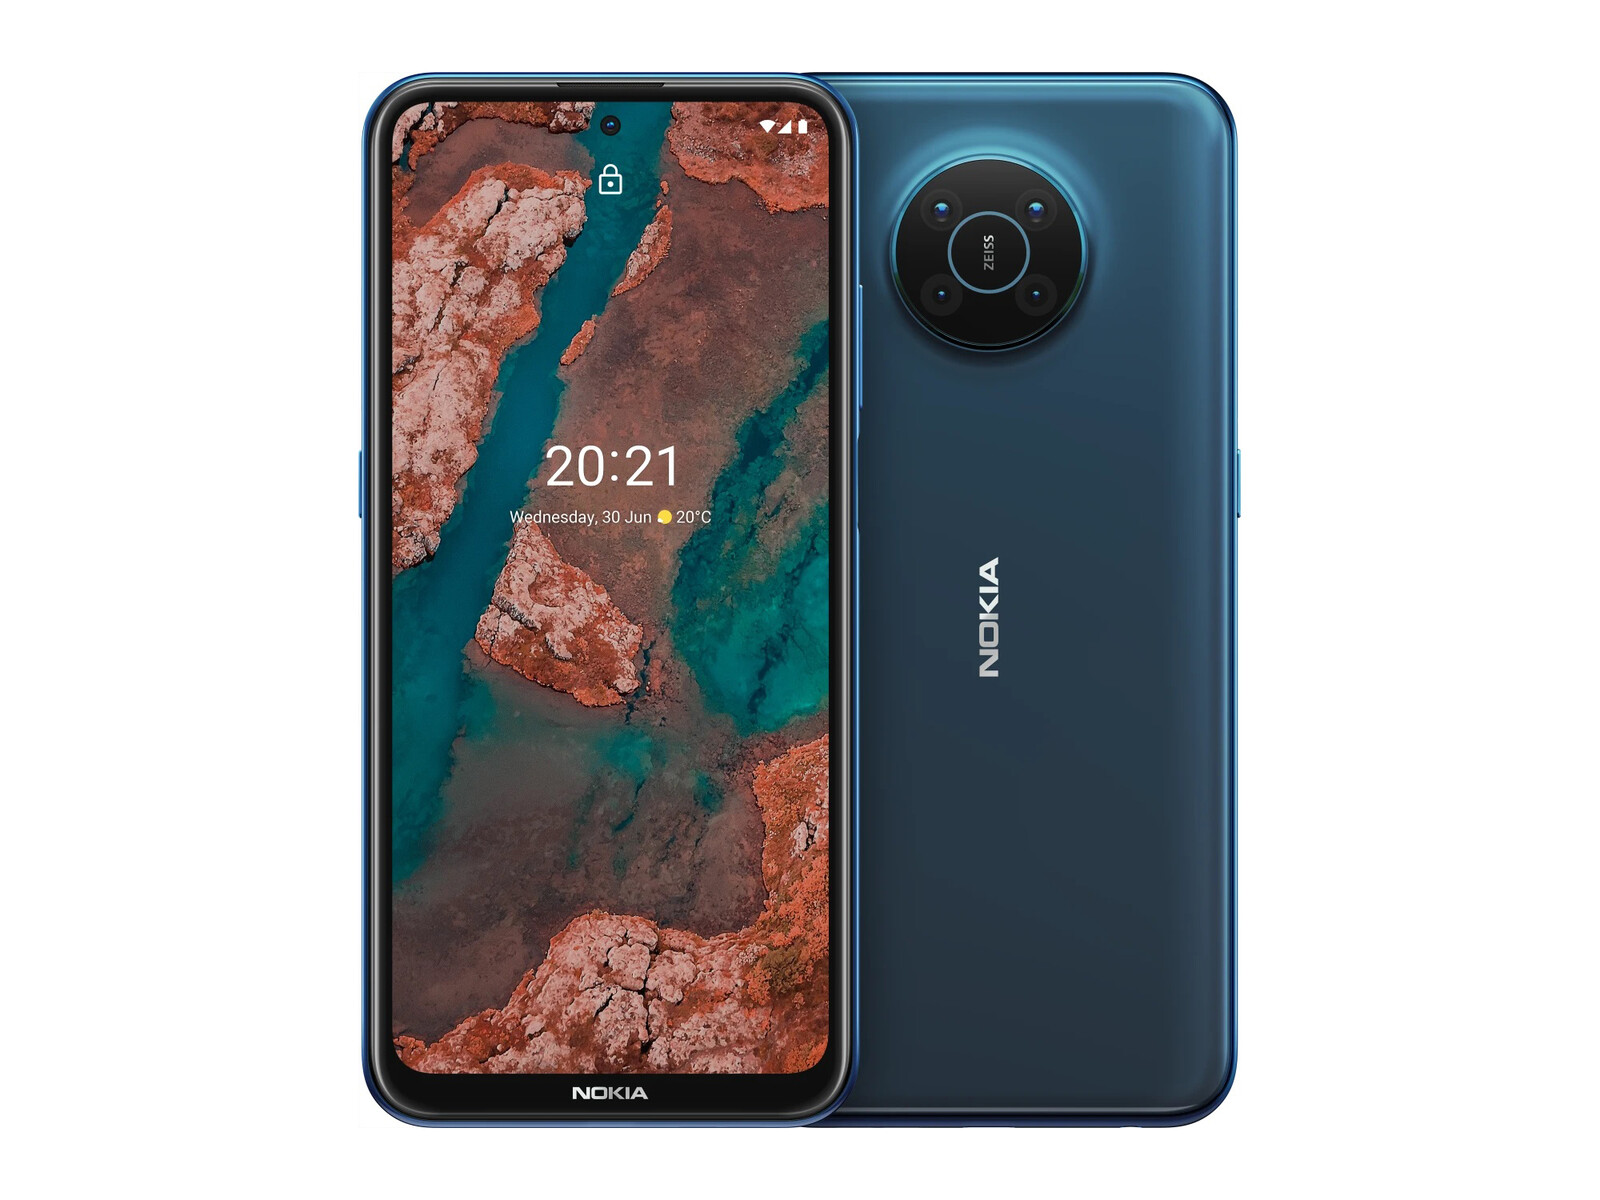 Nokia X20 smartphone review - Long warranty and 5G - NotebookCheck.net